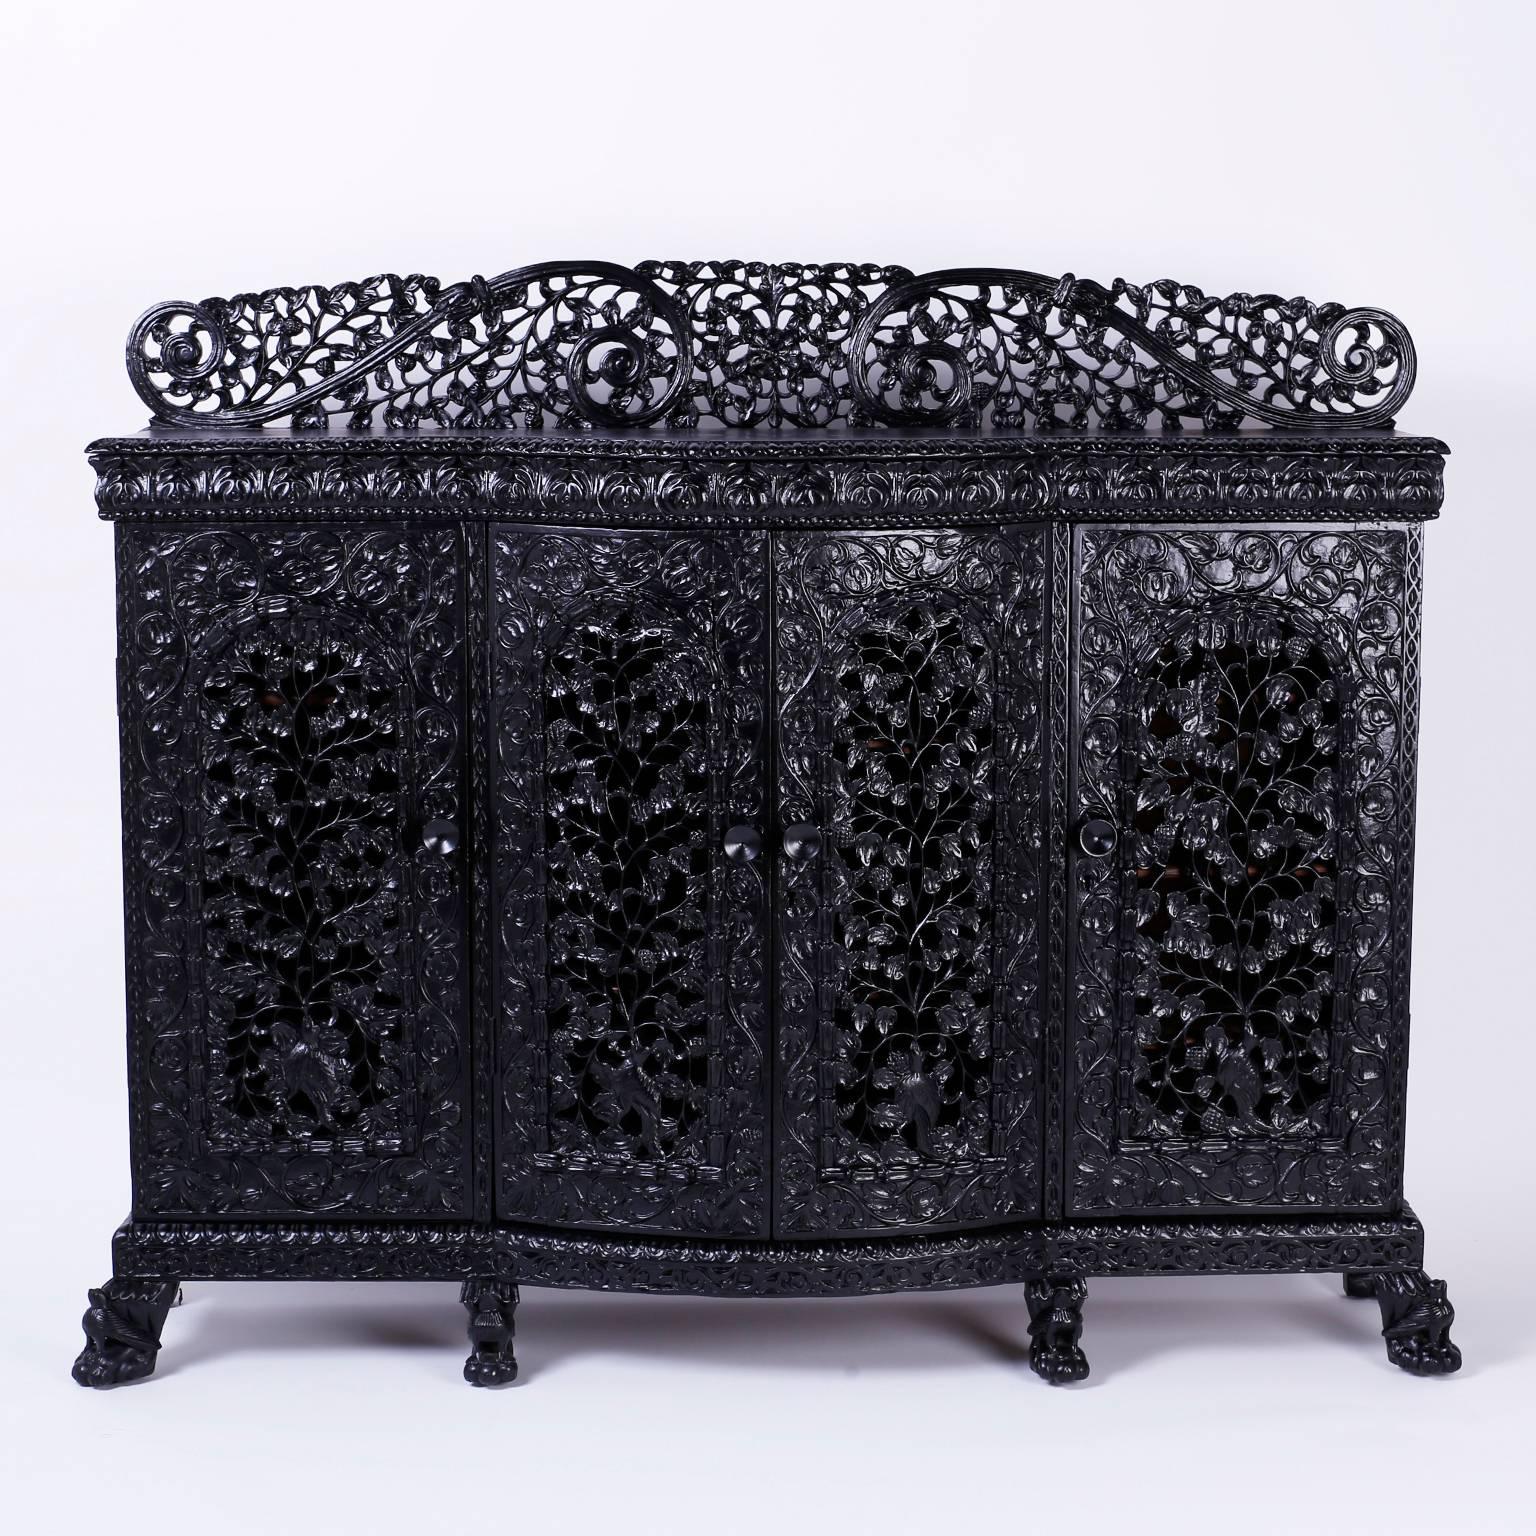 Anglo Indian cabinet or credenza intricately carved with dramatic floral designs throughout. Featuring a bold backsplash, open fret work on all four doors with six animal paw feet offering plenty of storage and a strong presence.